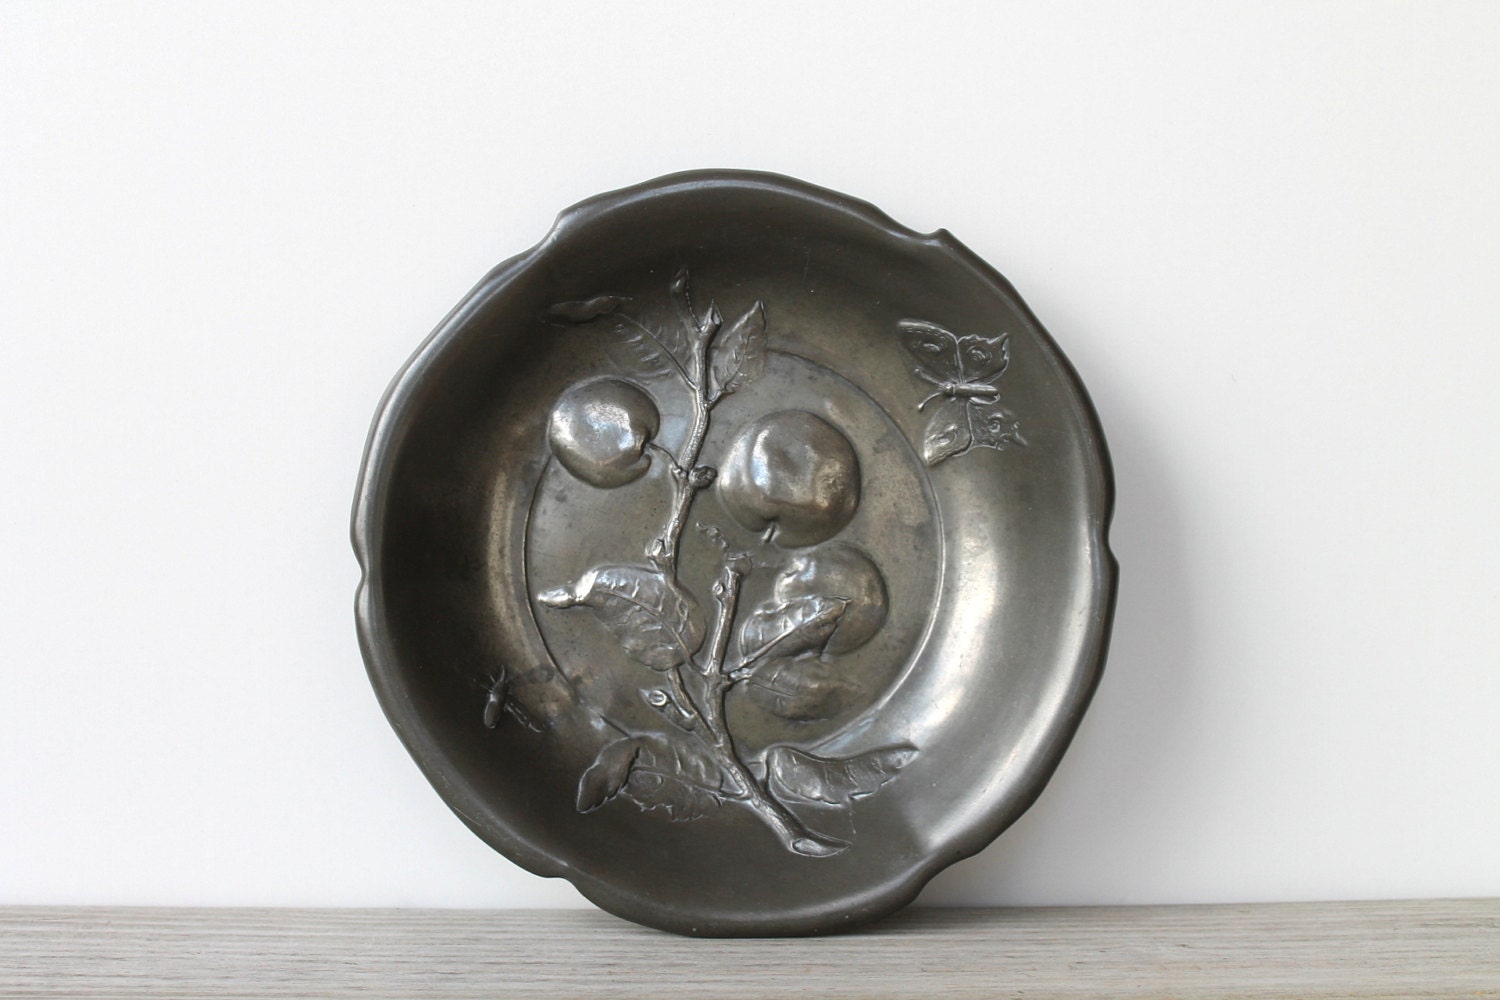 Vintage cast metal plate / pewter gray / apple / dragonfly / butterfly / fruit bowl / farm house decor / rustic / cabin kitchen wall decor